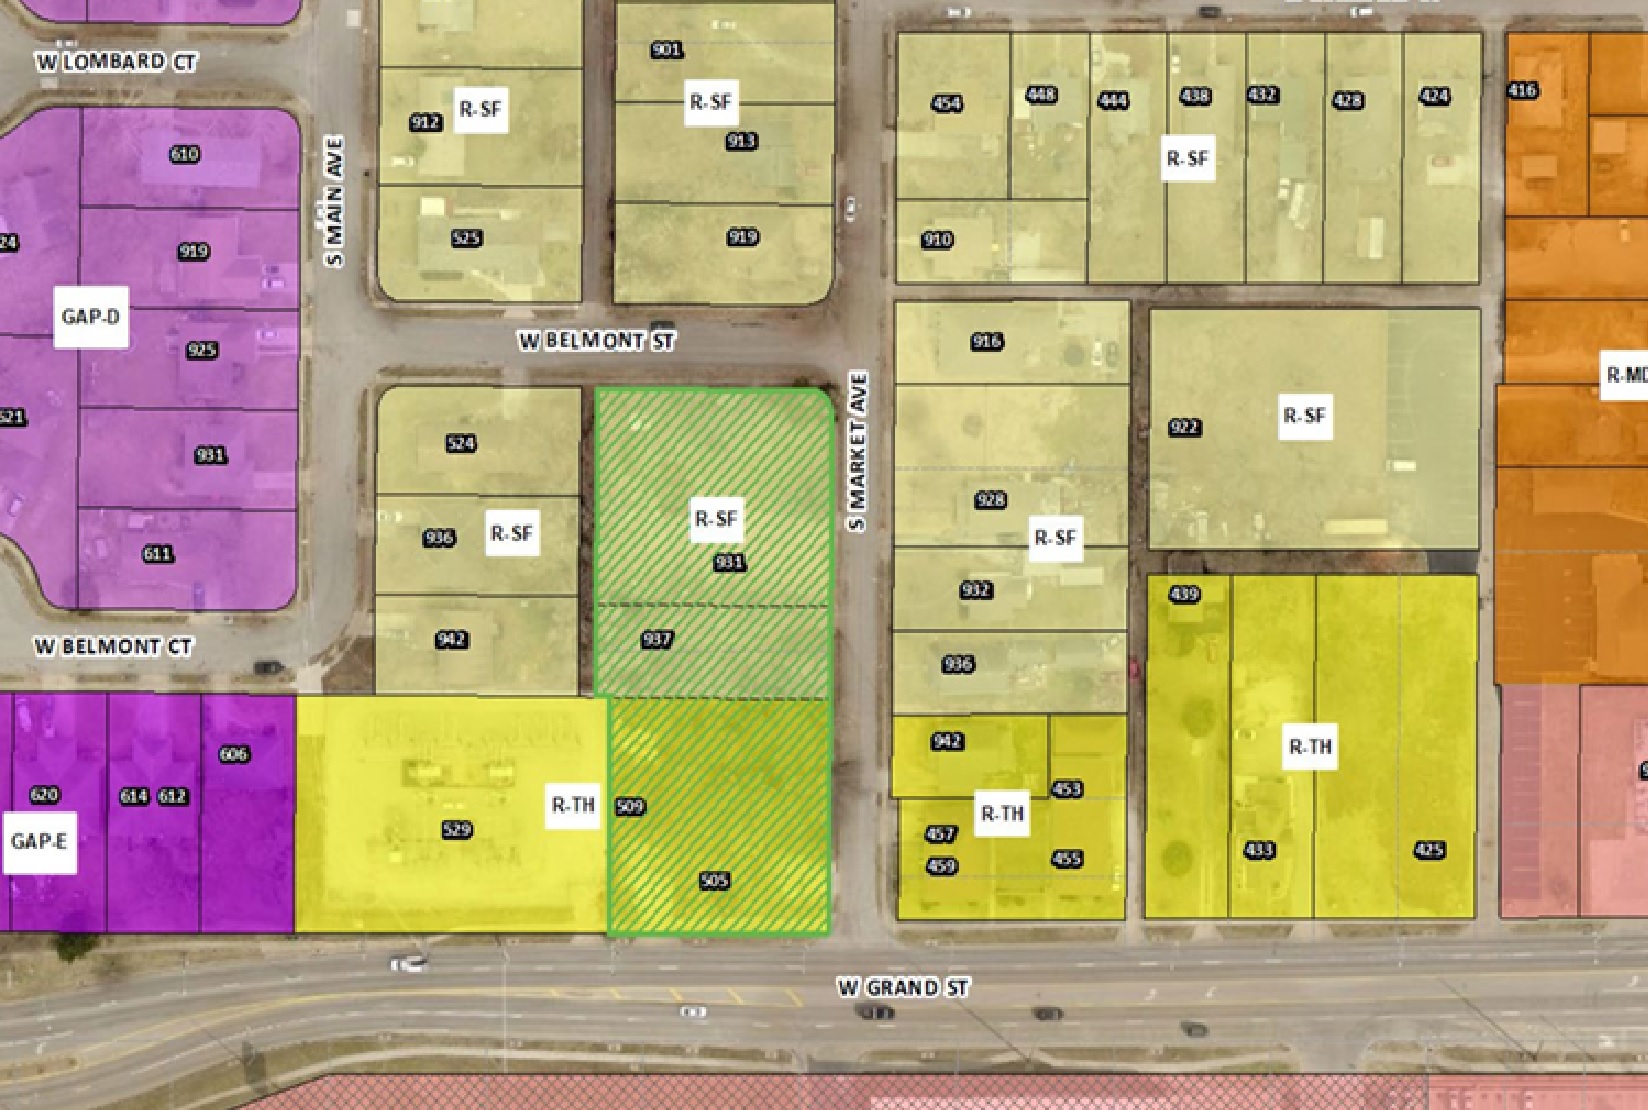 GDL Enterprises property on Grand Street and Market Avenue outlined and shaded in light green on a zoning map.